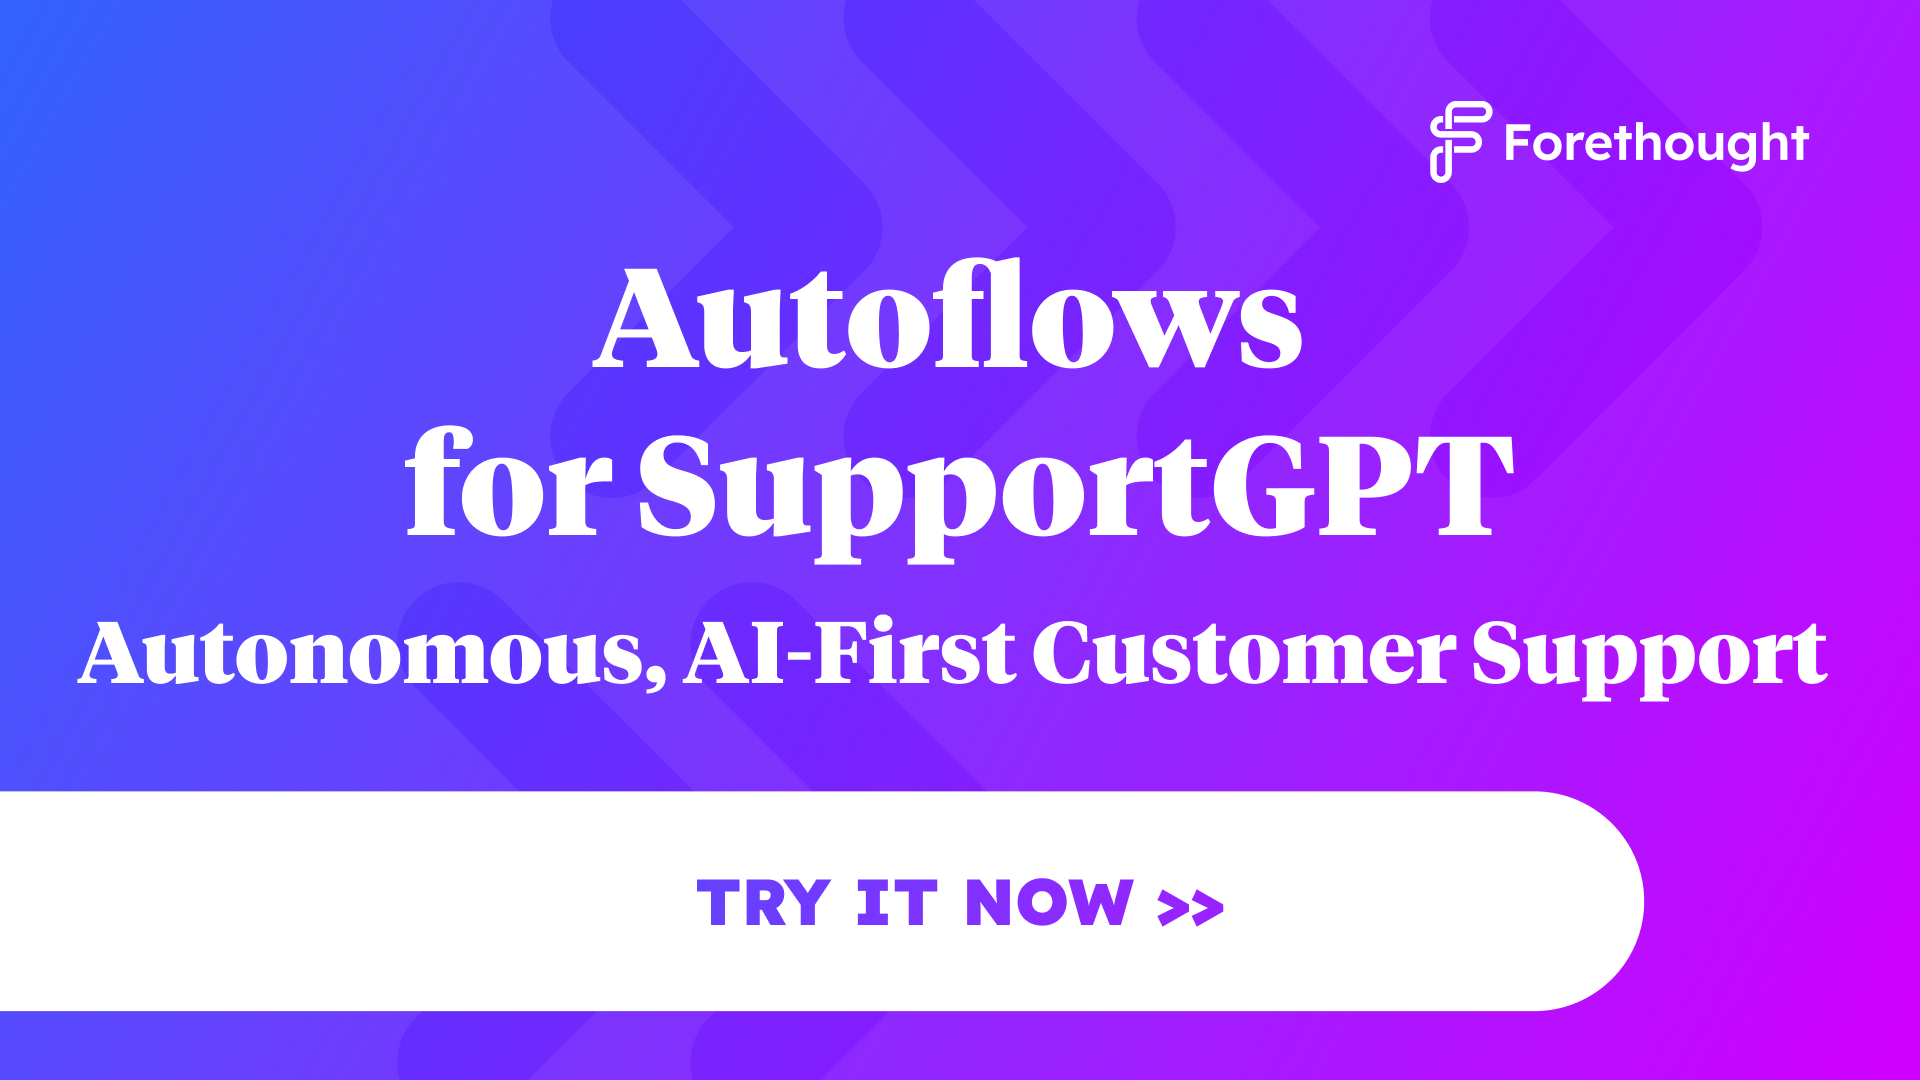 customer support AI is autonomous with Autoflows for SupportGPT